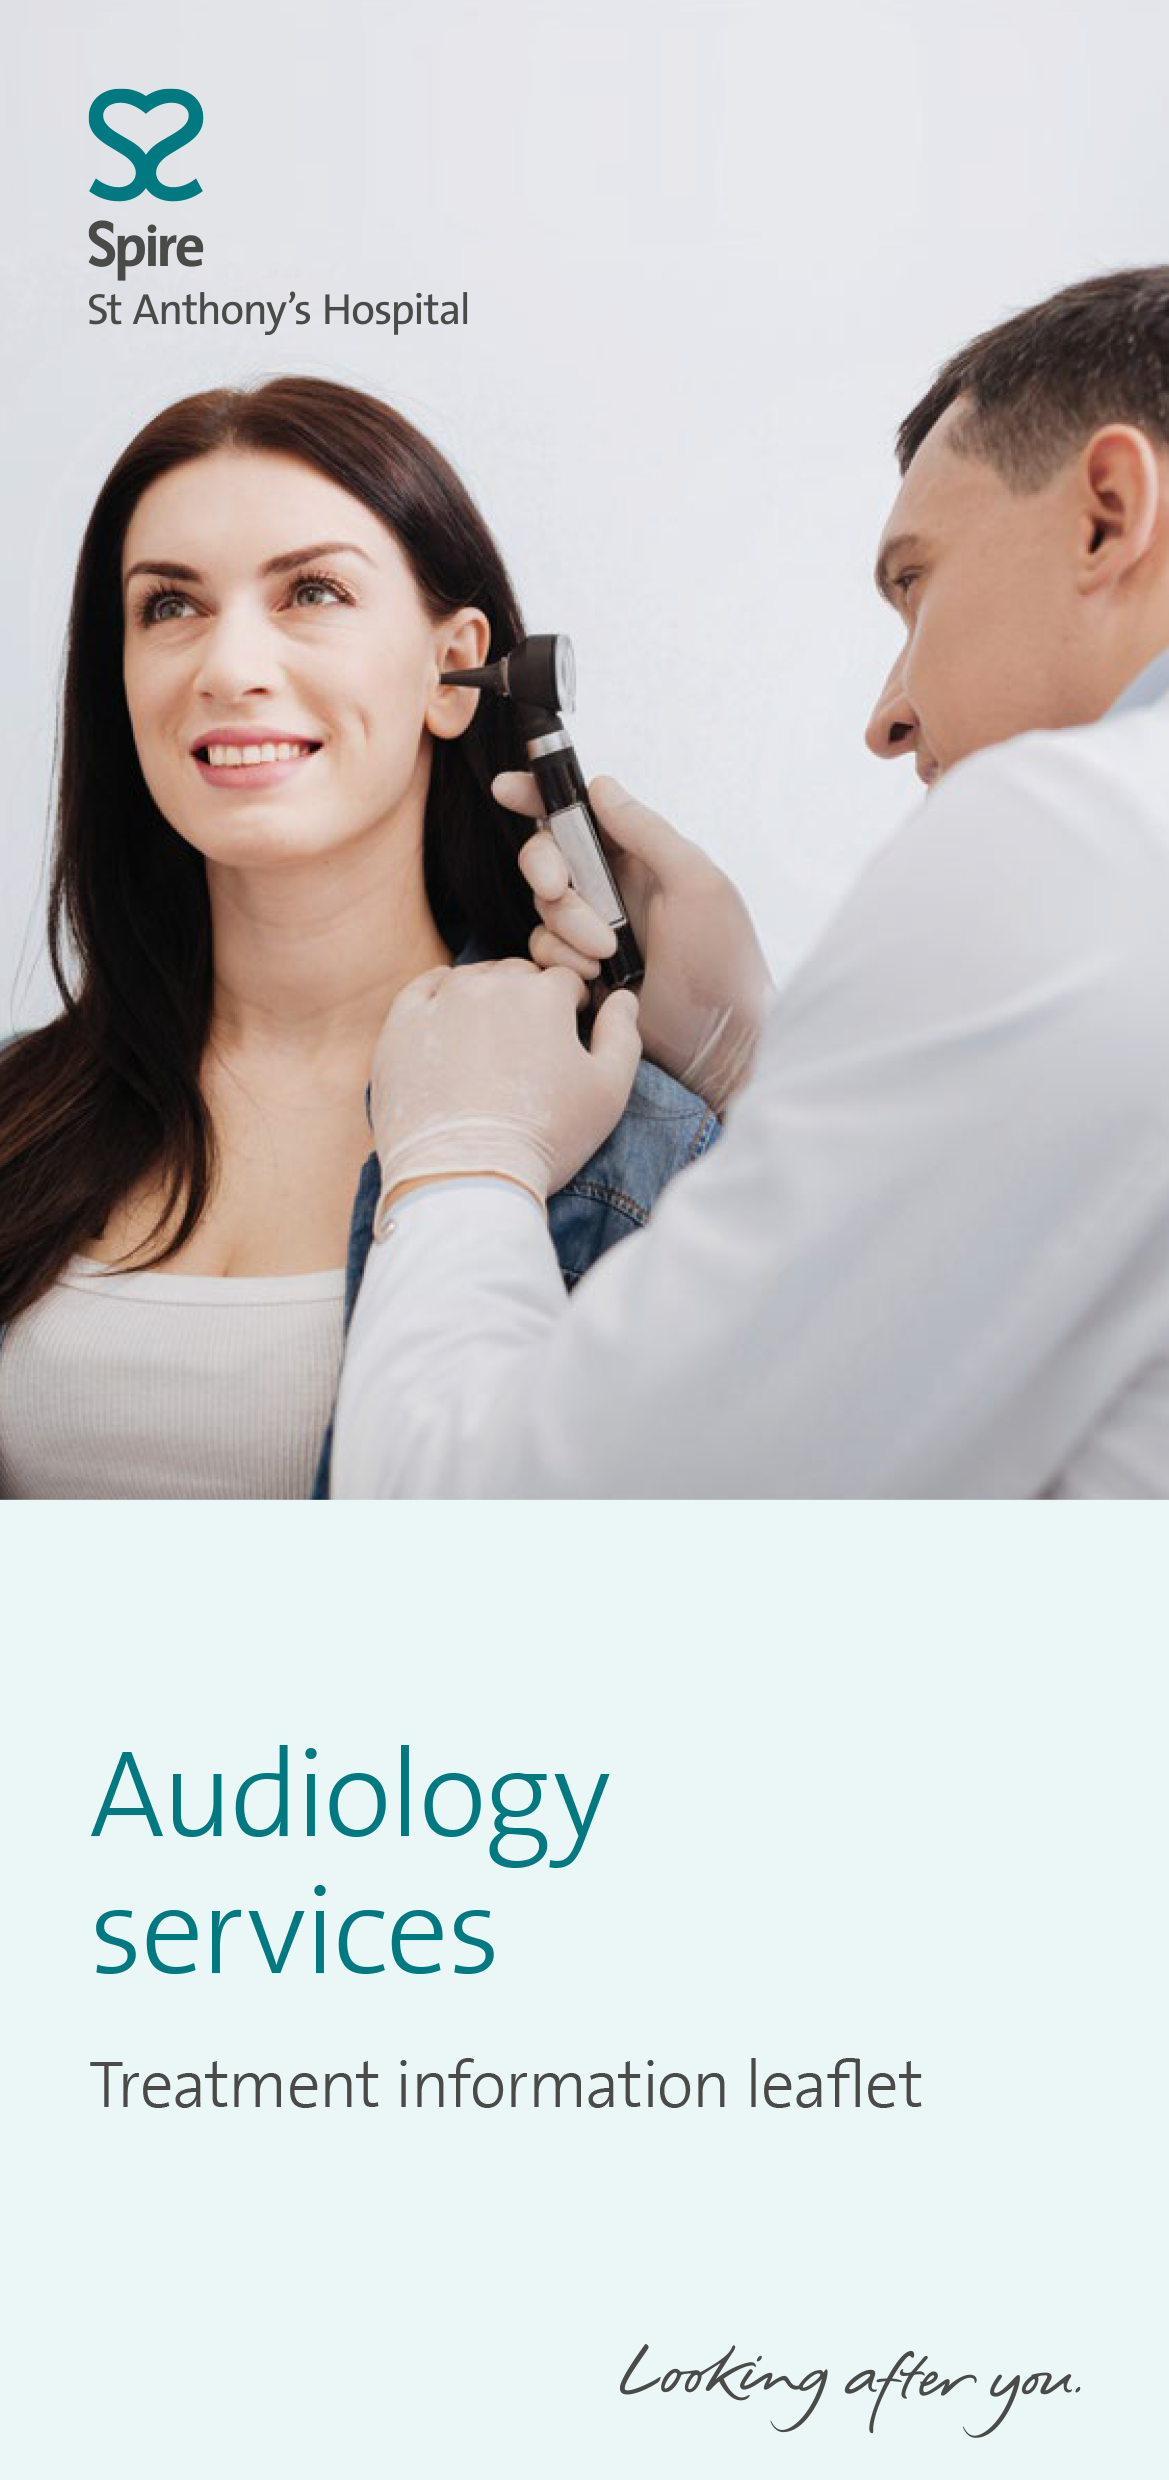 Spire Hospital Audiology Services (pg 1)